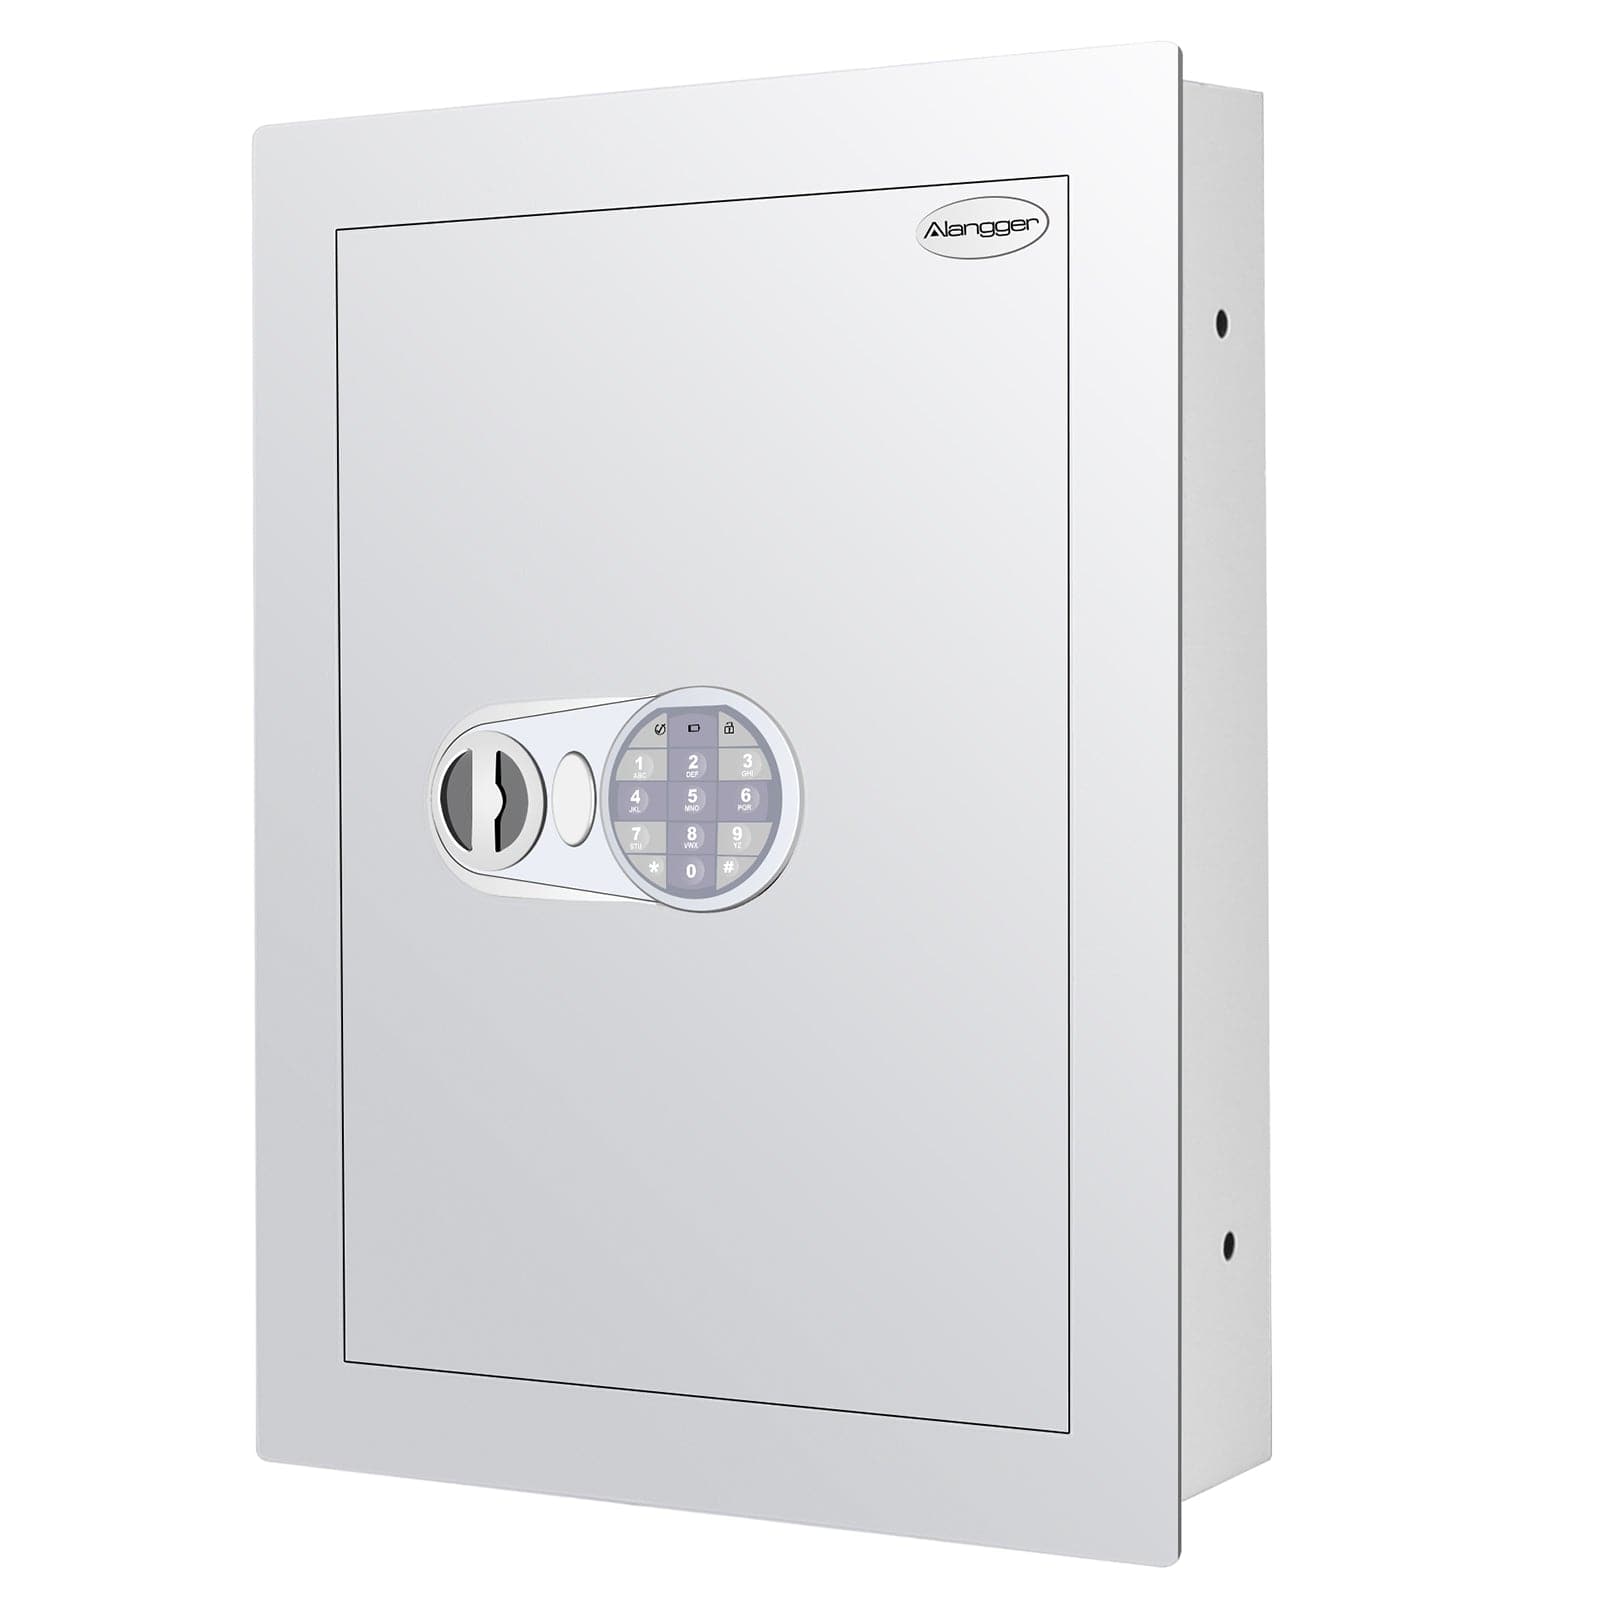 Digital Wall Safe, White, Small - LAWS007